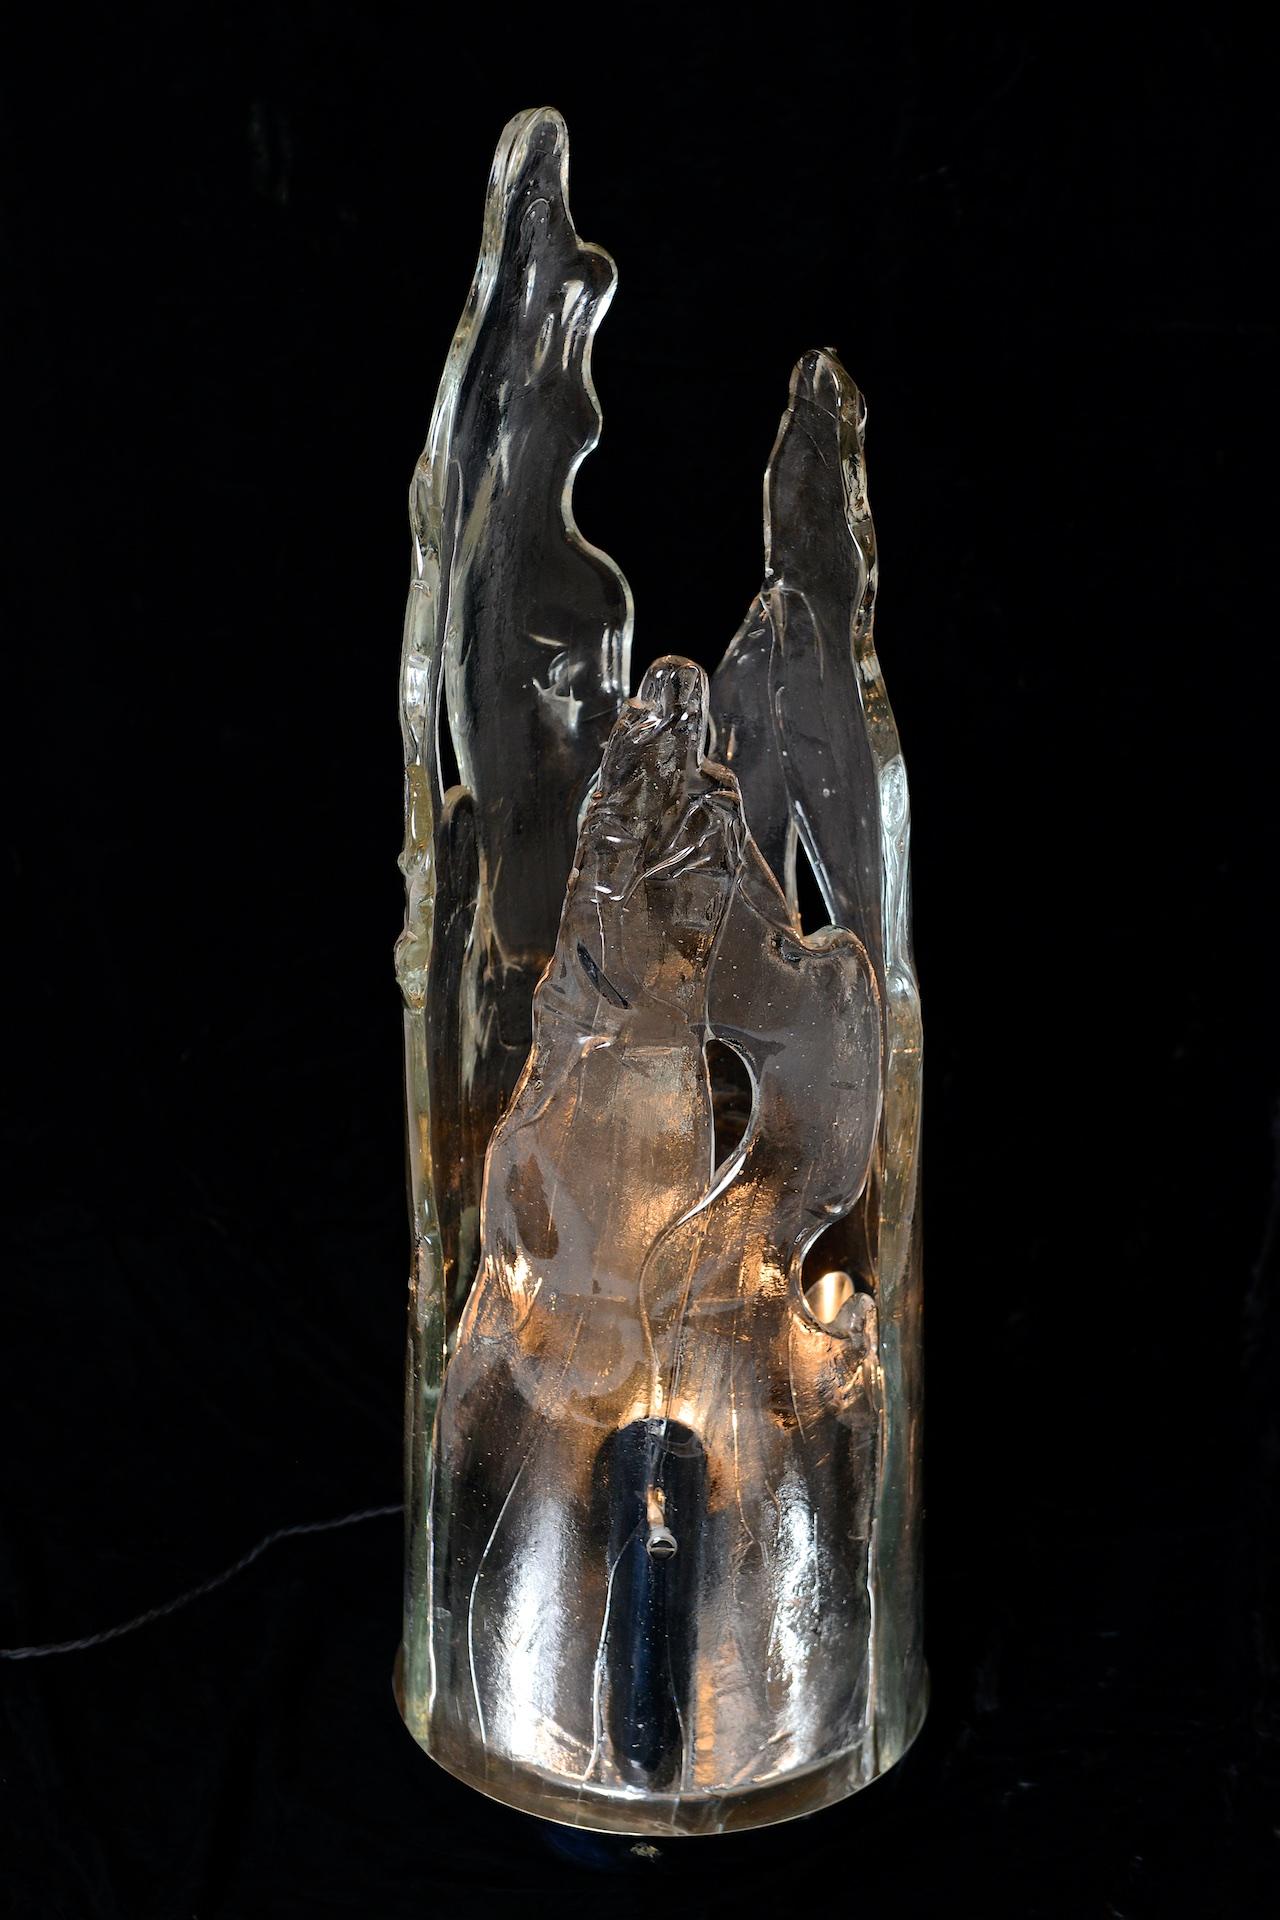 Sculptural glass light. Looks like melting ice! Italy circa 1970 by the glass lighting designer Carlo Nason.

Three separate bulb holders inside glass 

Can be used as a table or floor lamp.